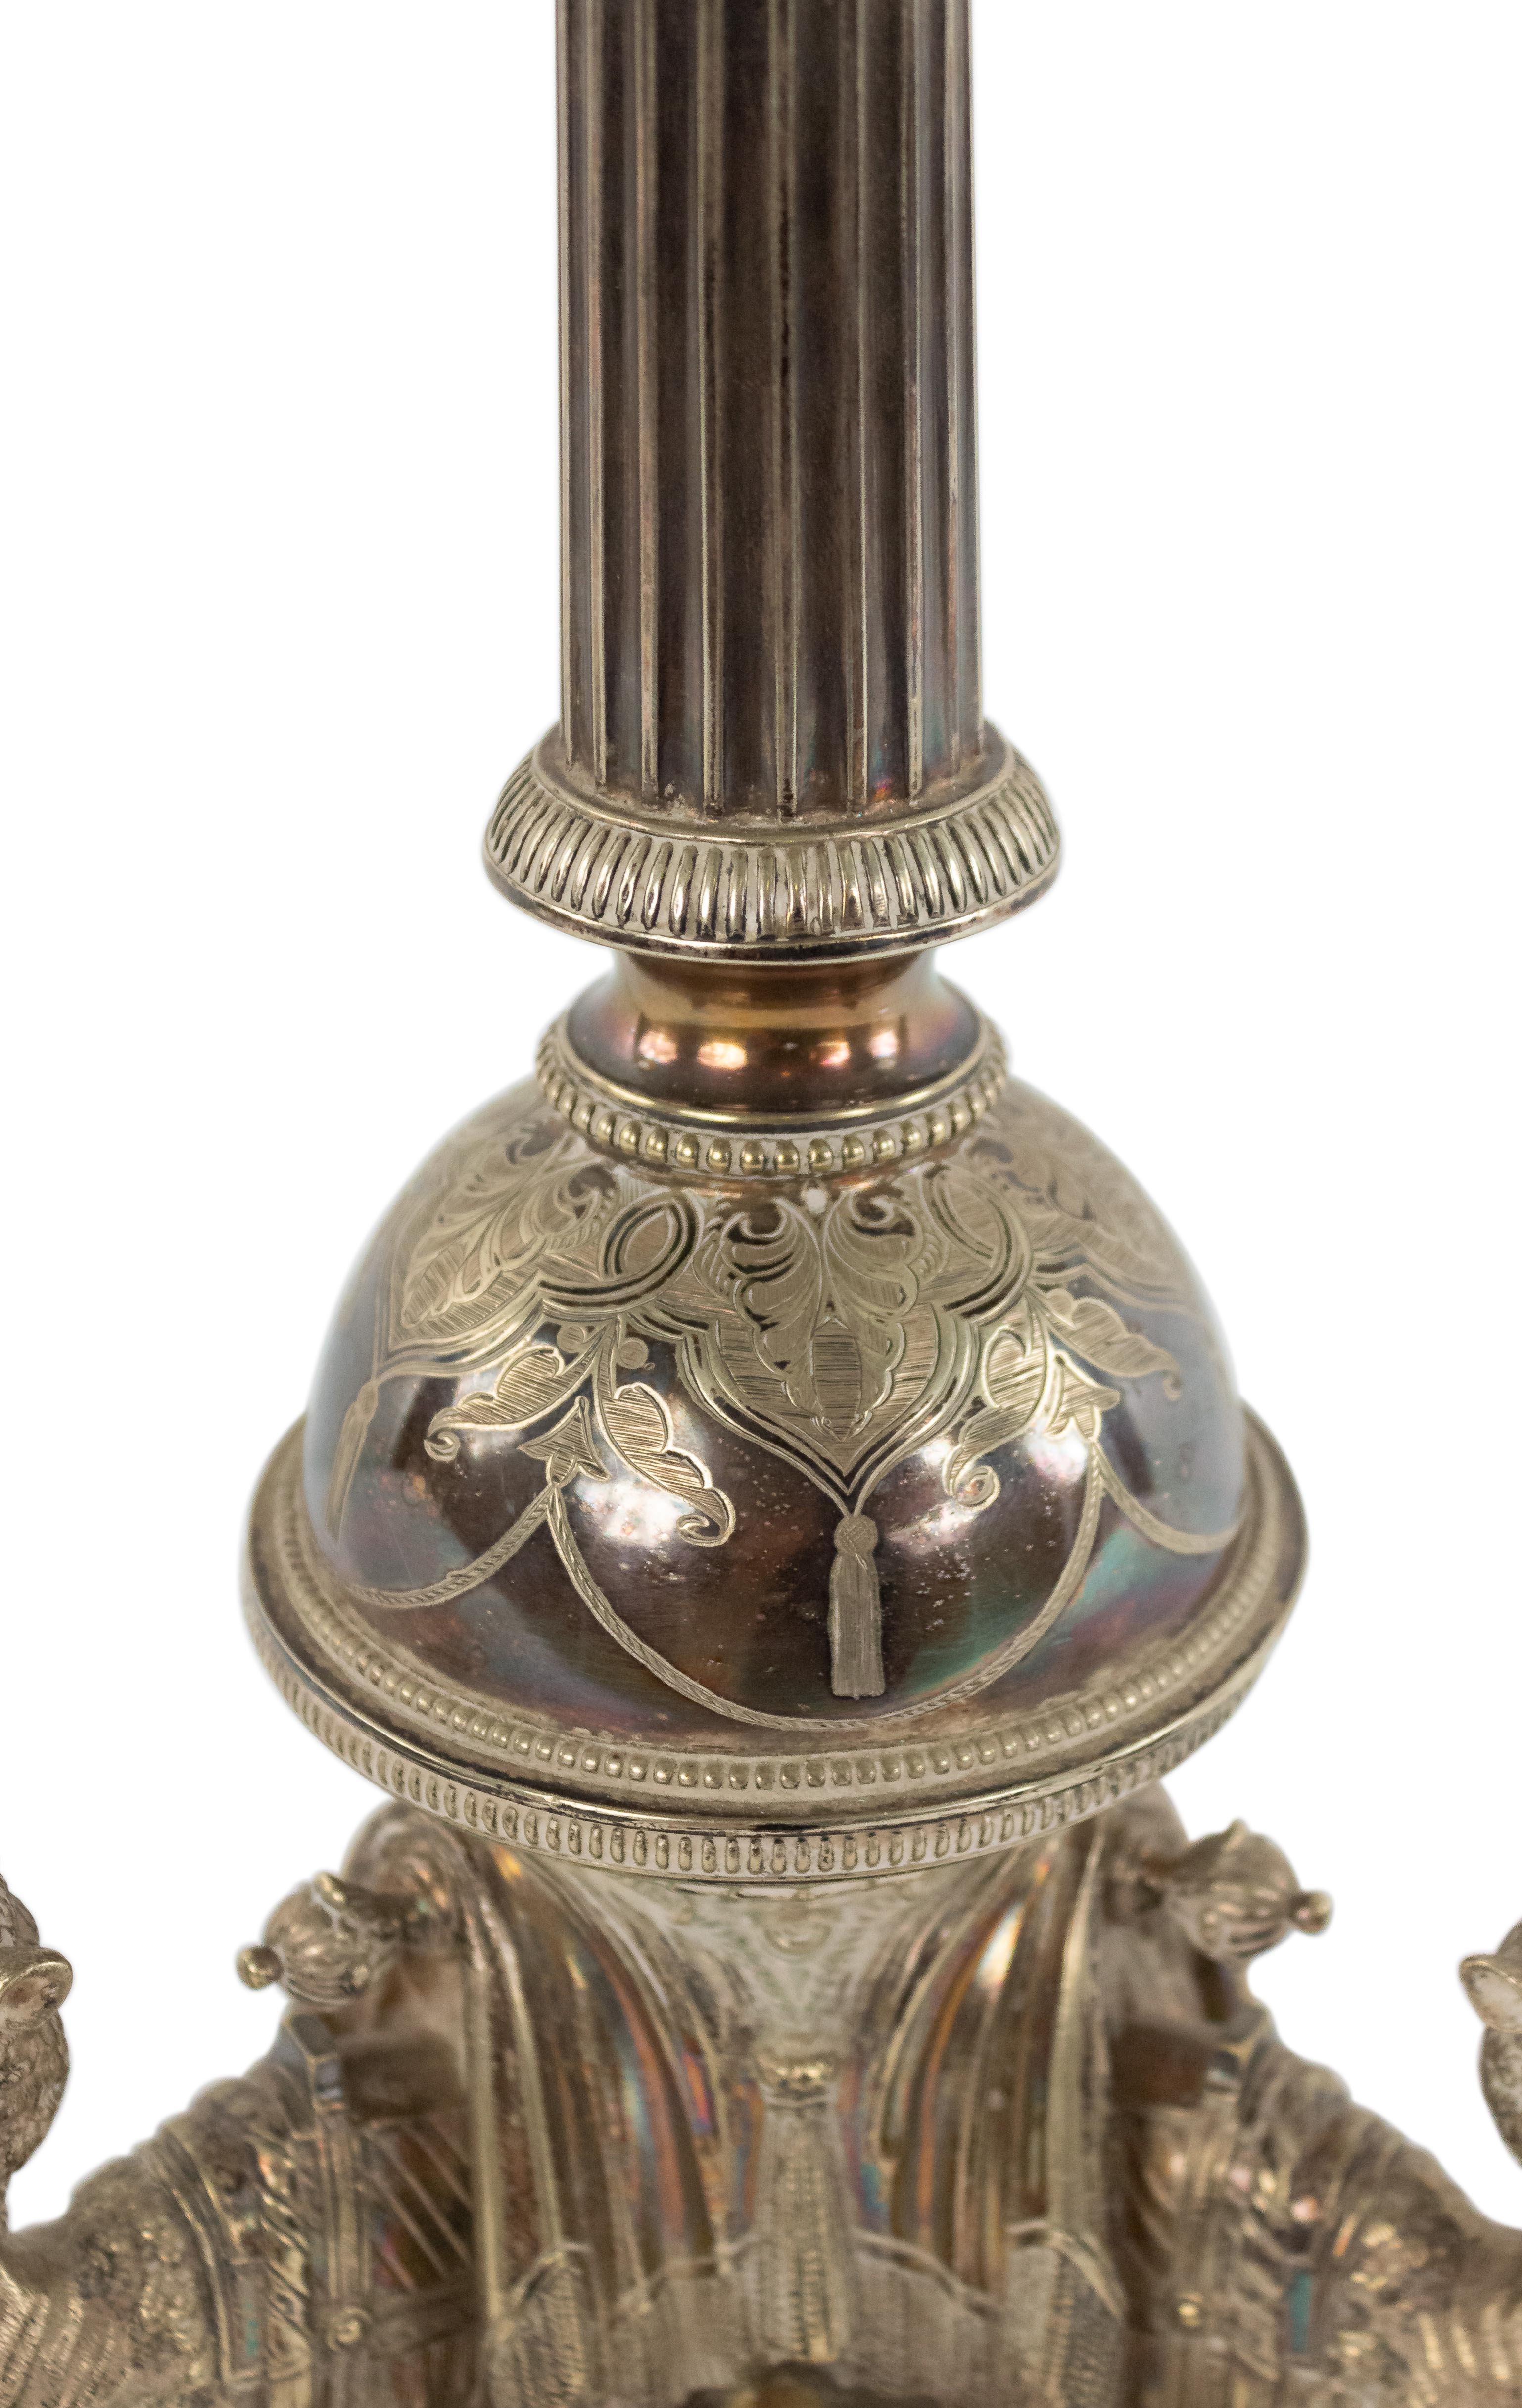 English Victorian (dated 1865) silver plated table lamp with camels kneeling on a tripartite base beneath a fluted columnar shaft.
